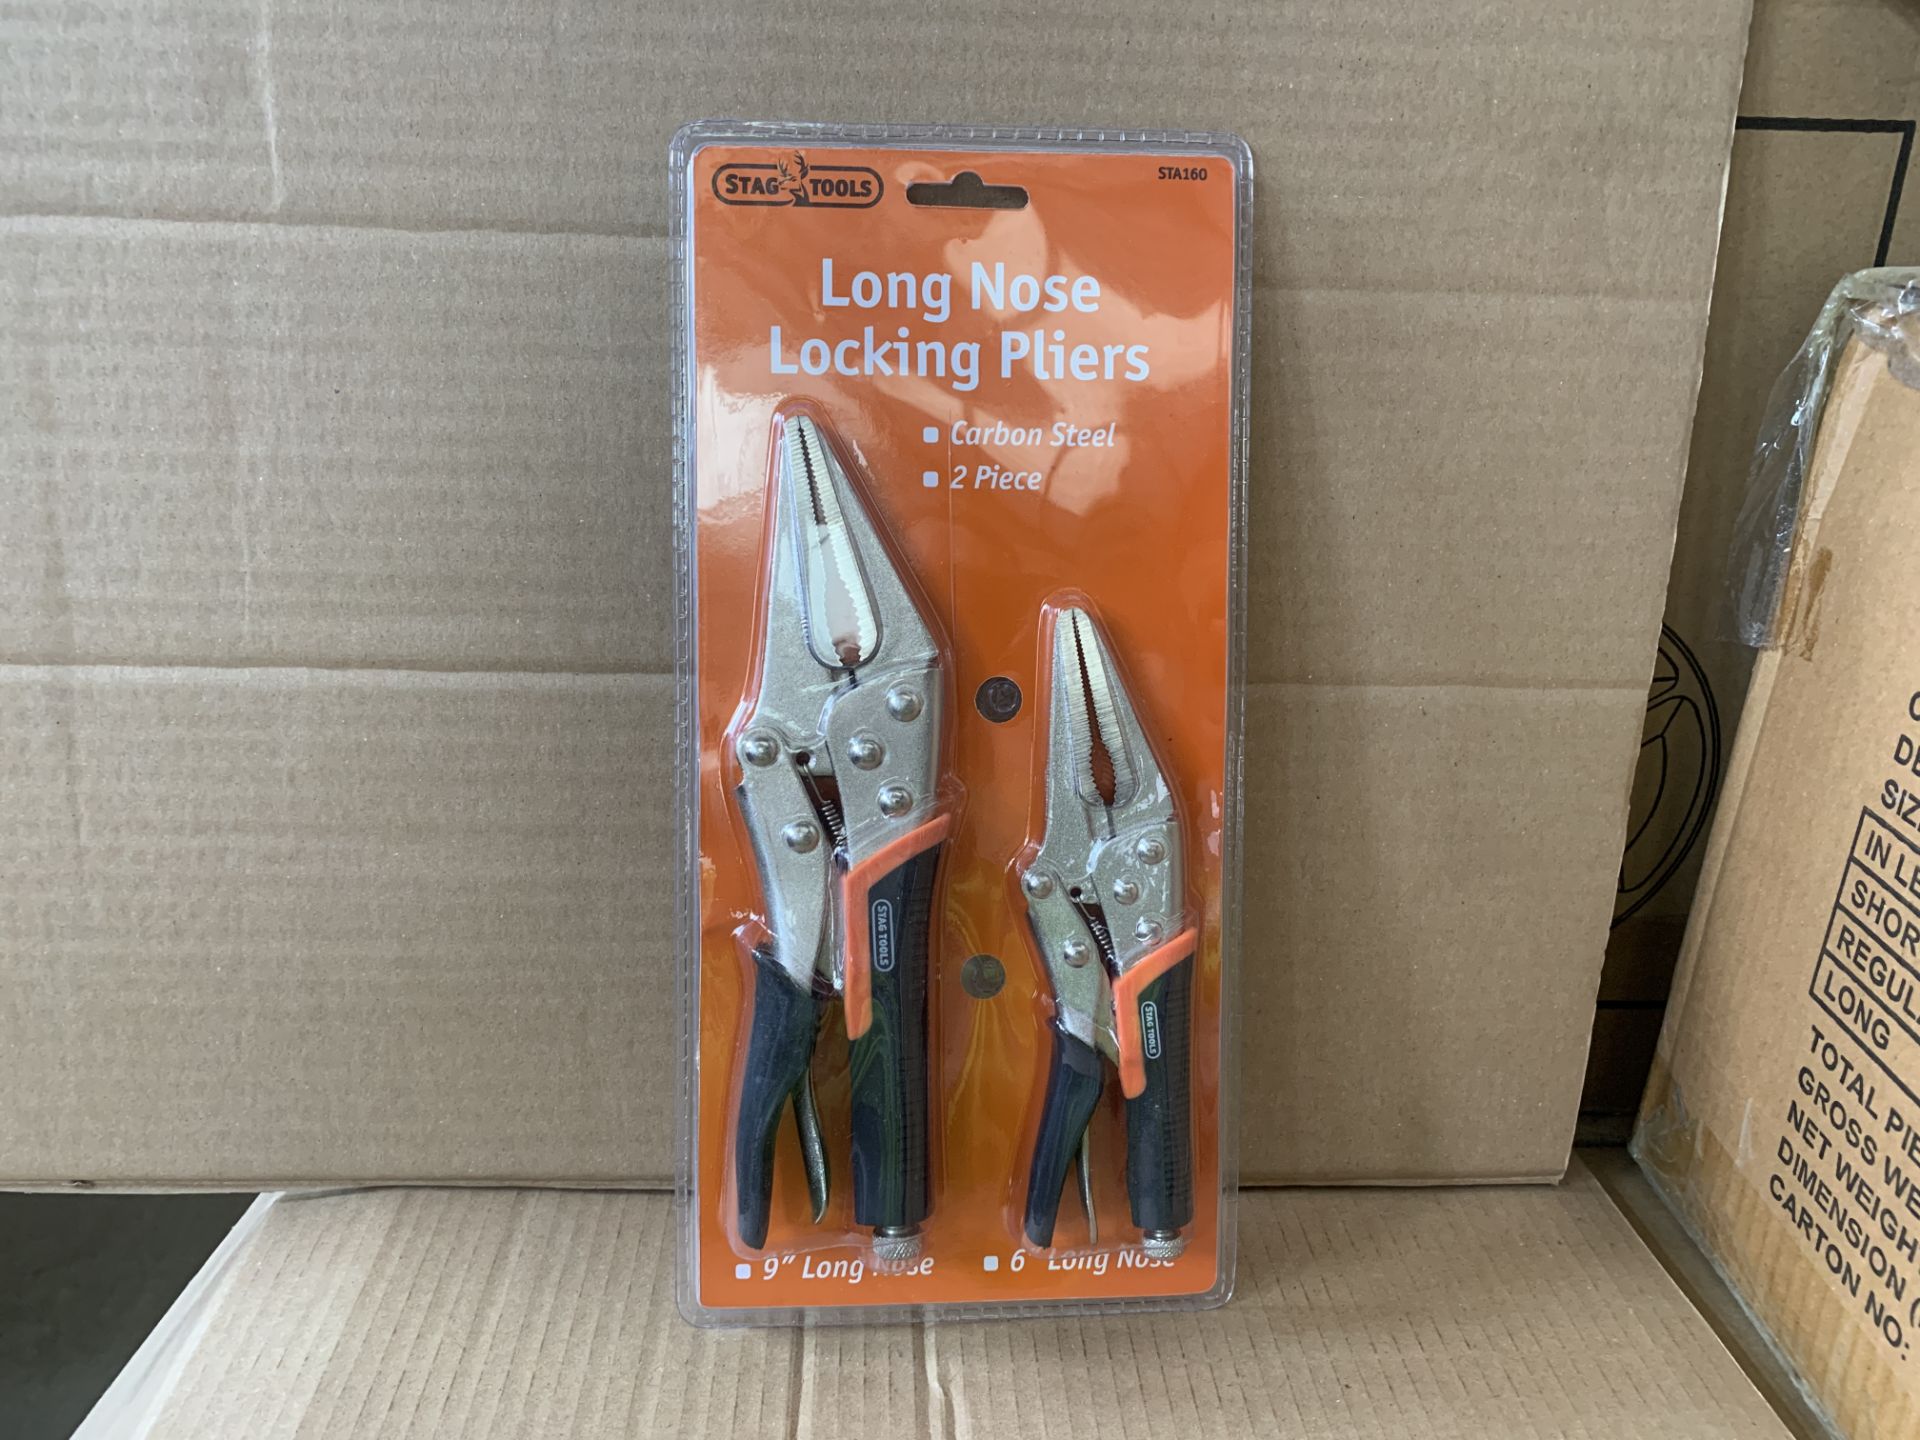 8 X BRAND NEW SETS OF 2 STAG TOOLS LONG NOSE LOCKING PLIERS